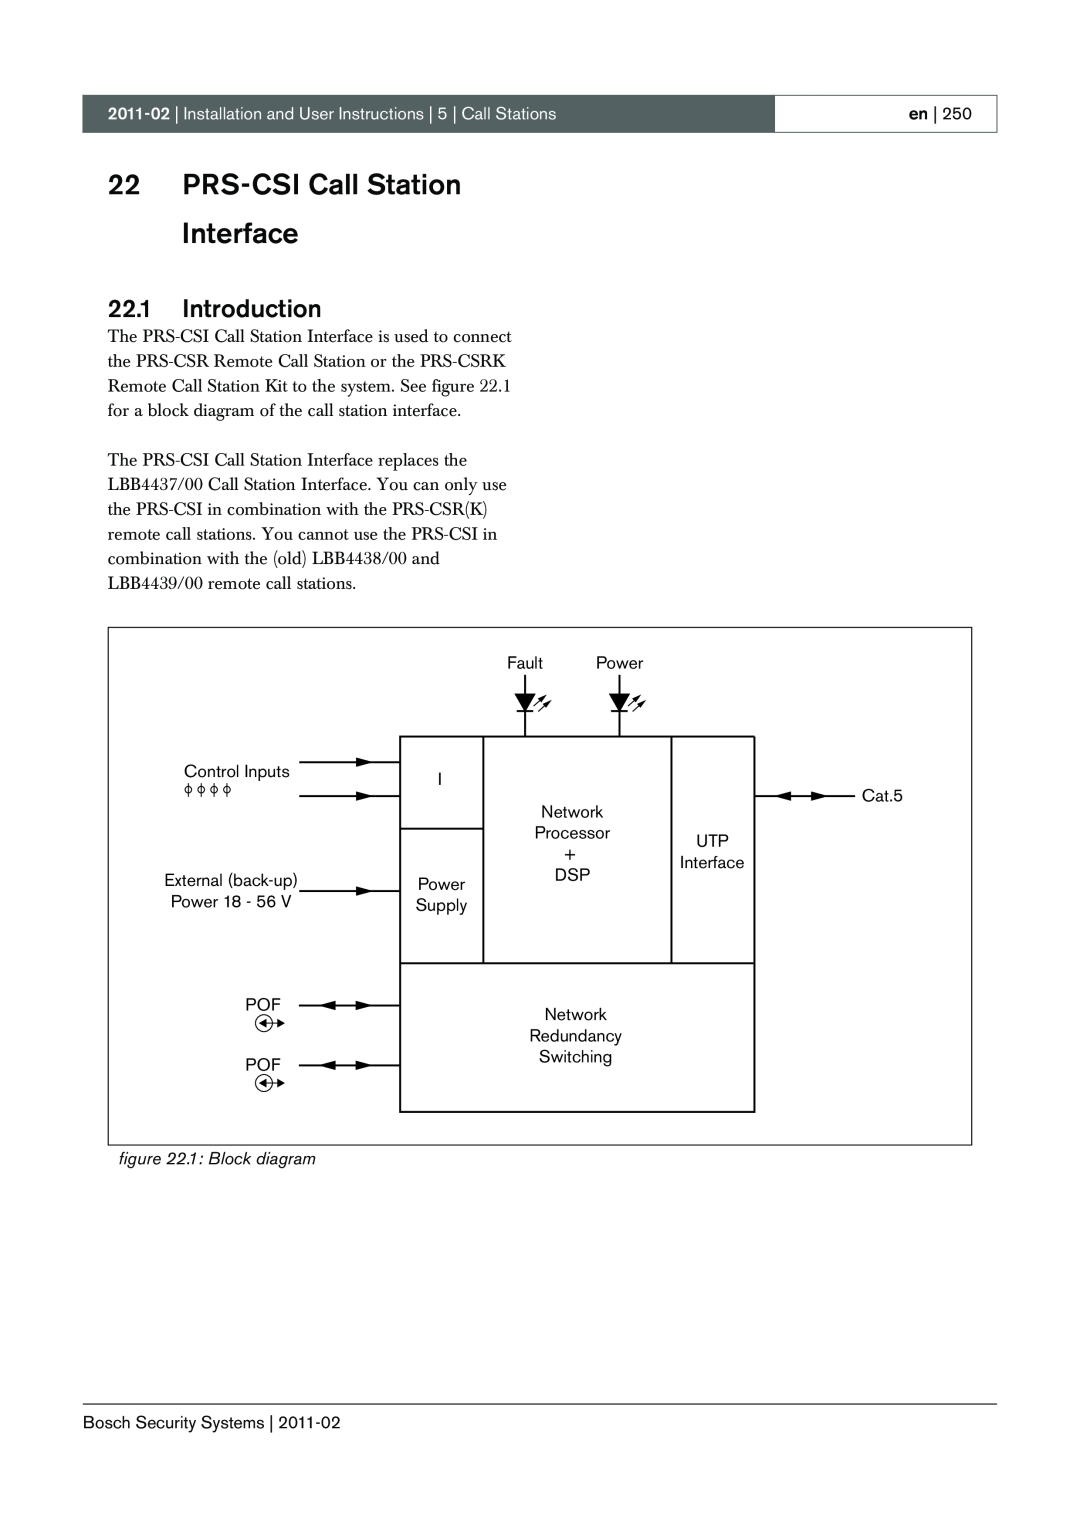 Bosch Appliances 3.5 manual 22PRS-CSICall Station Interface, 22.1Introduction, 1 Block diagram 